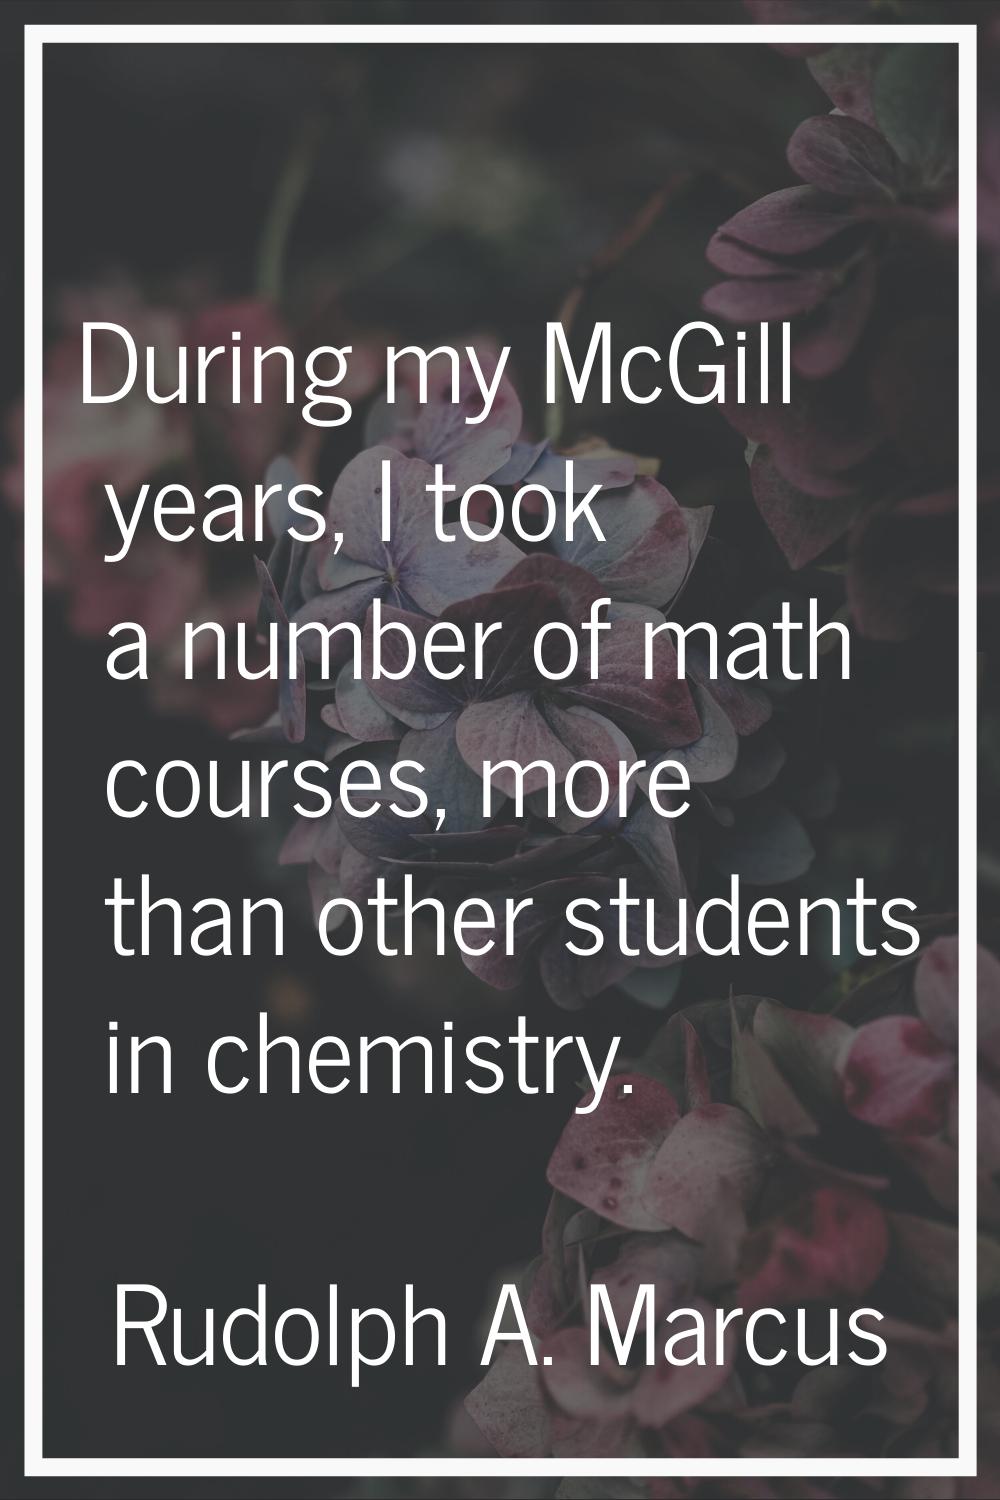 During my McGill years, I took a number of math courses, more than other students in chemistry.